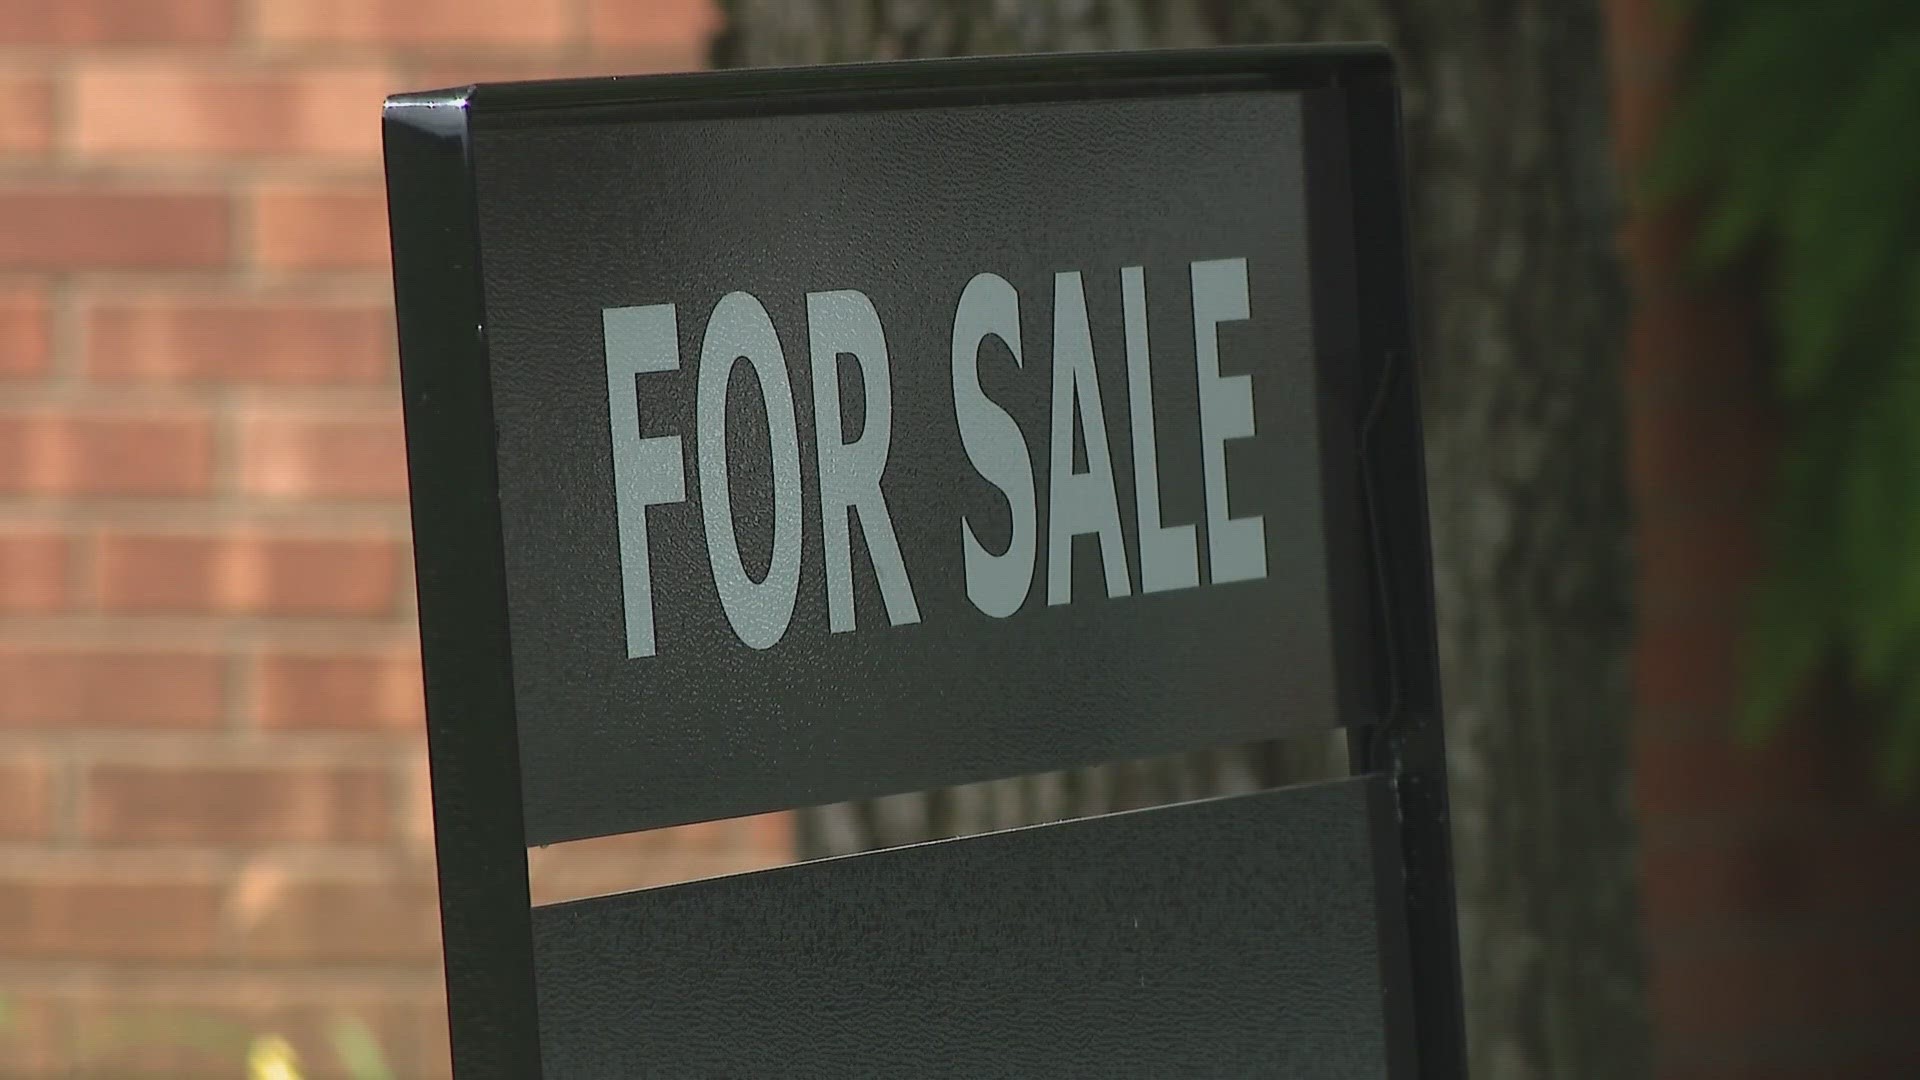 Auditor Michael Stinziano said home prices throughout Franklin County increased by 41% on average.